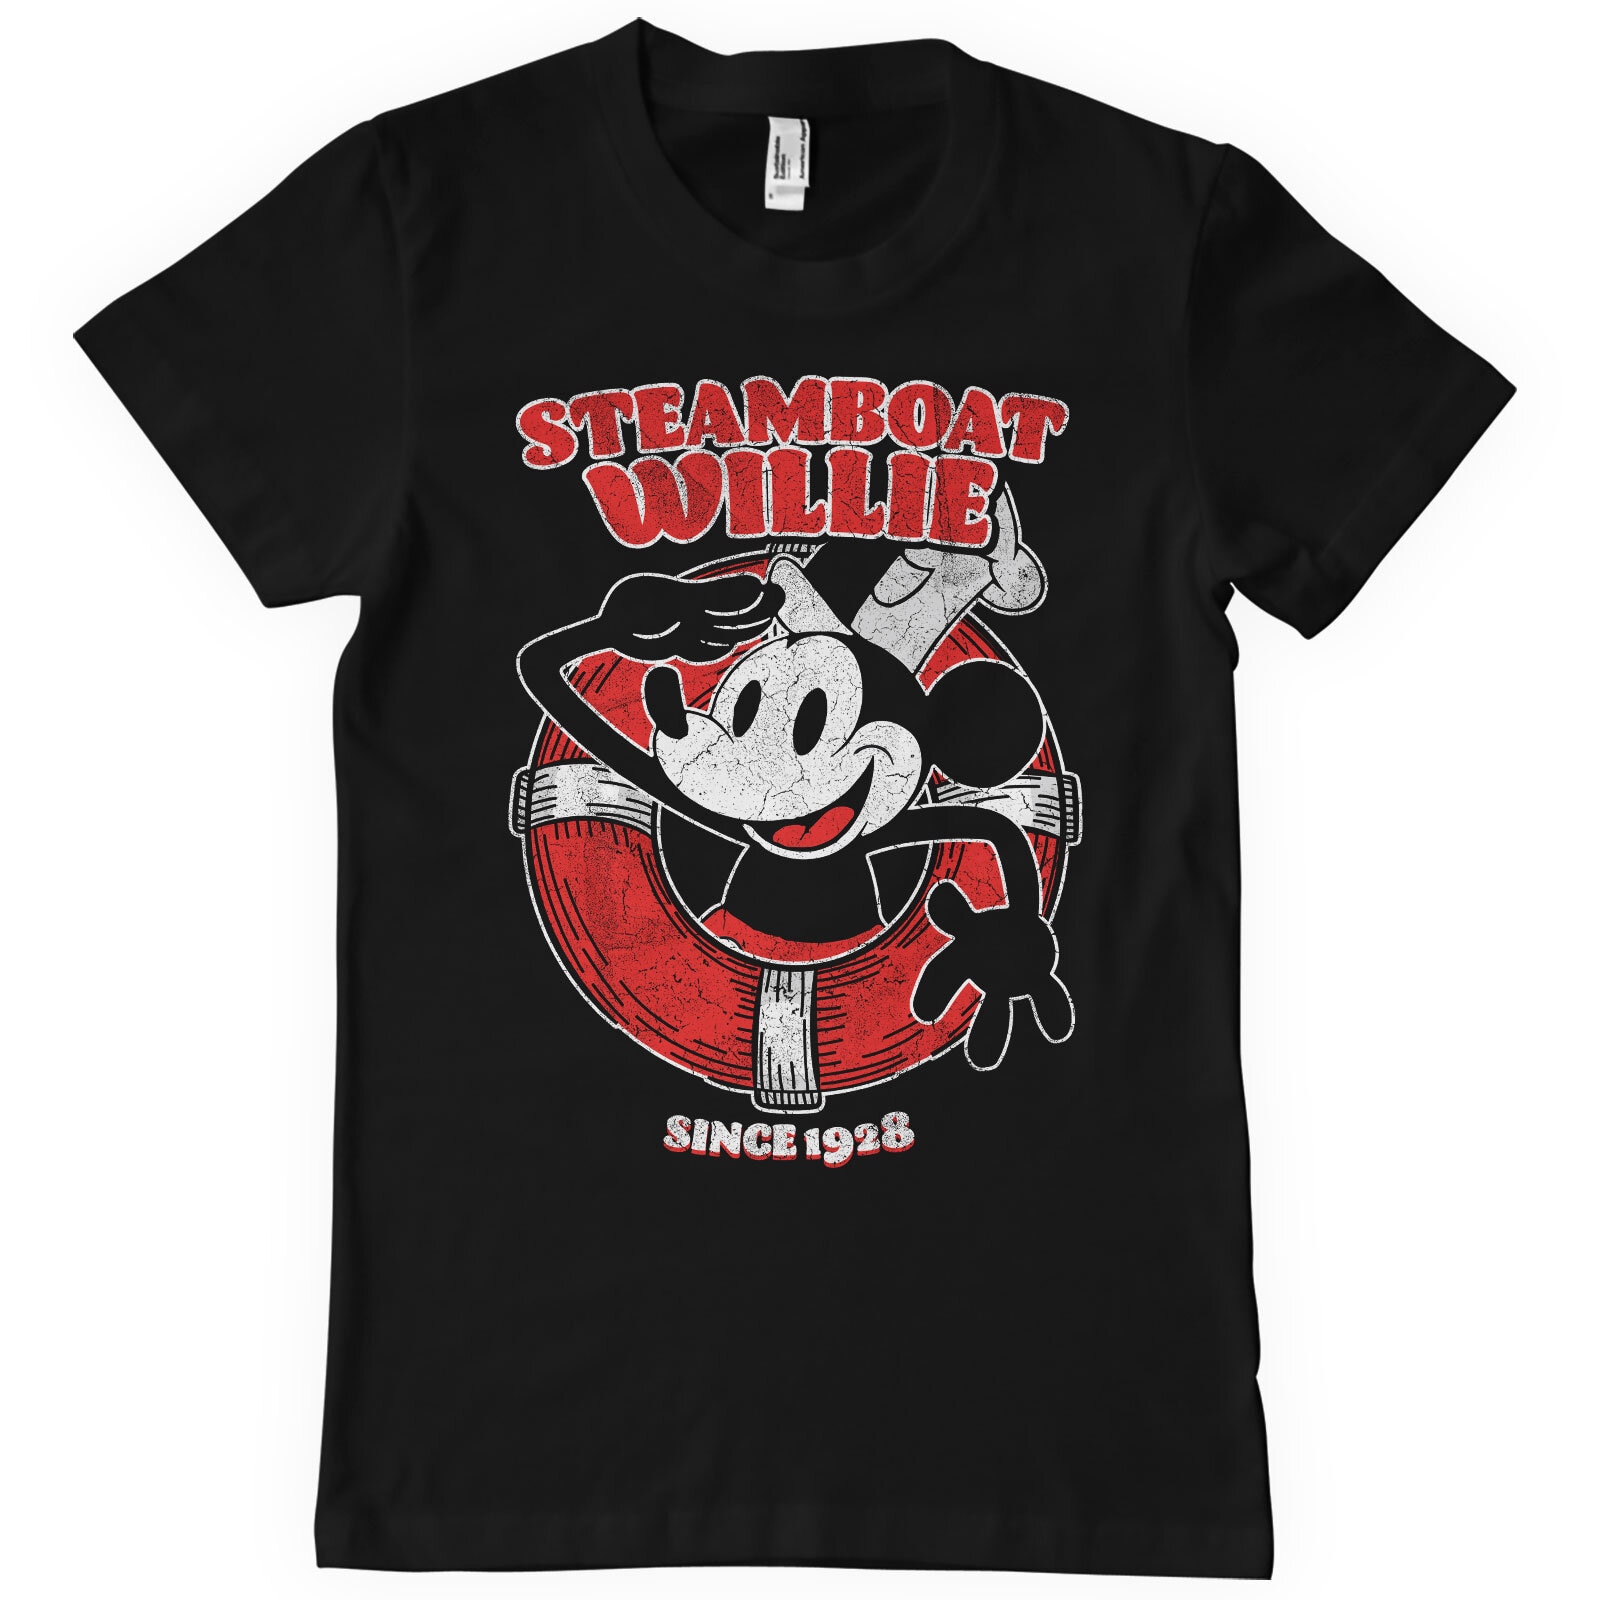 Steamboat Willie Since 1928 T-Shirt